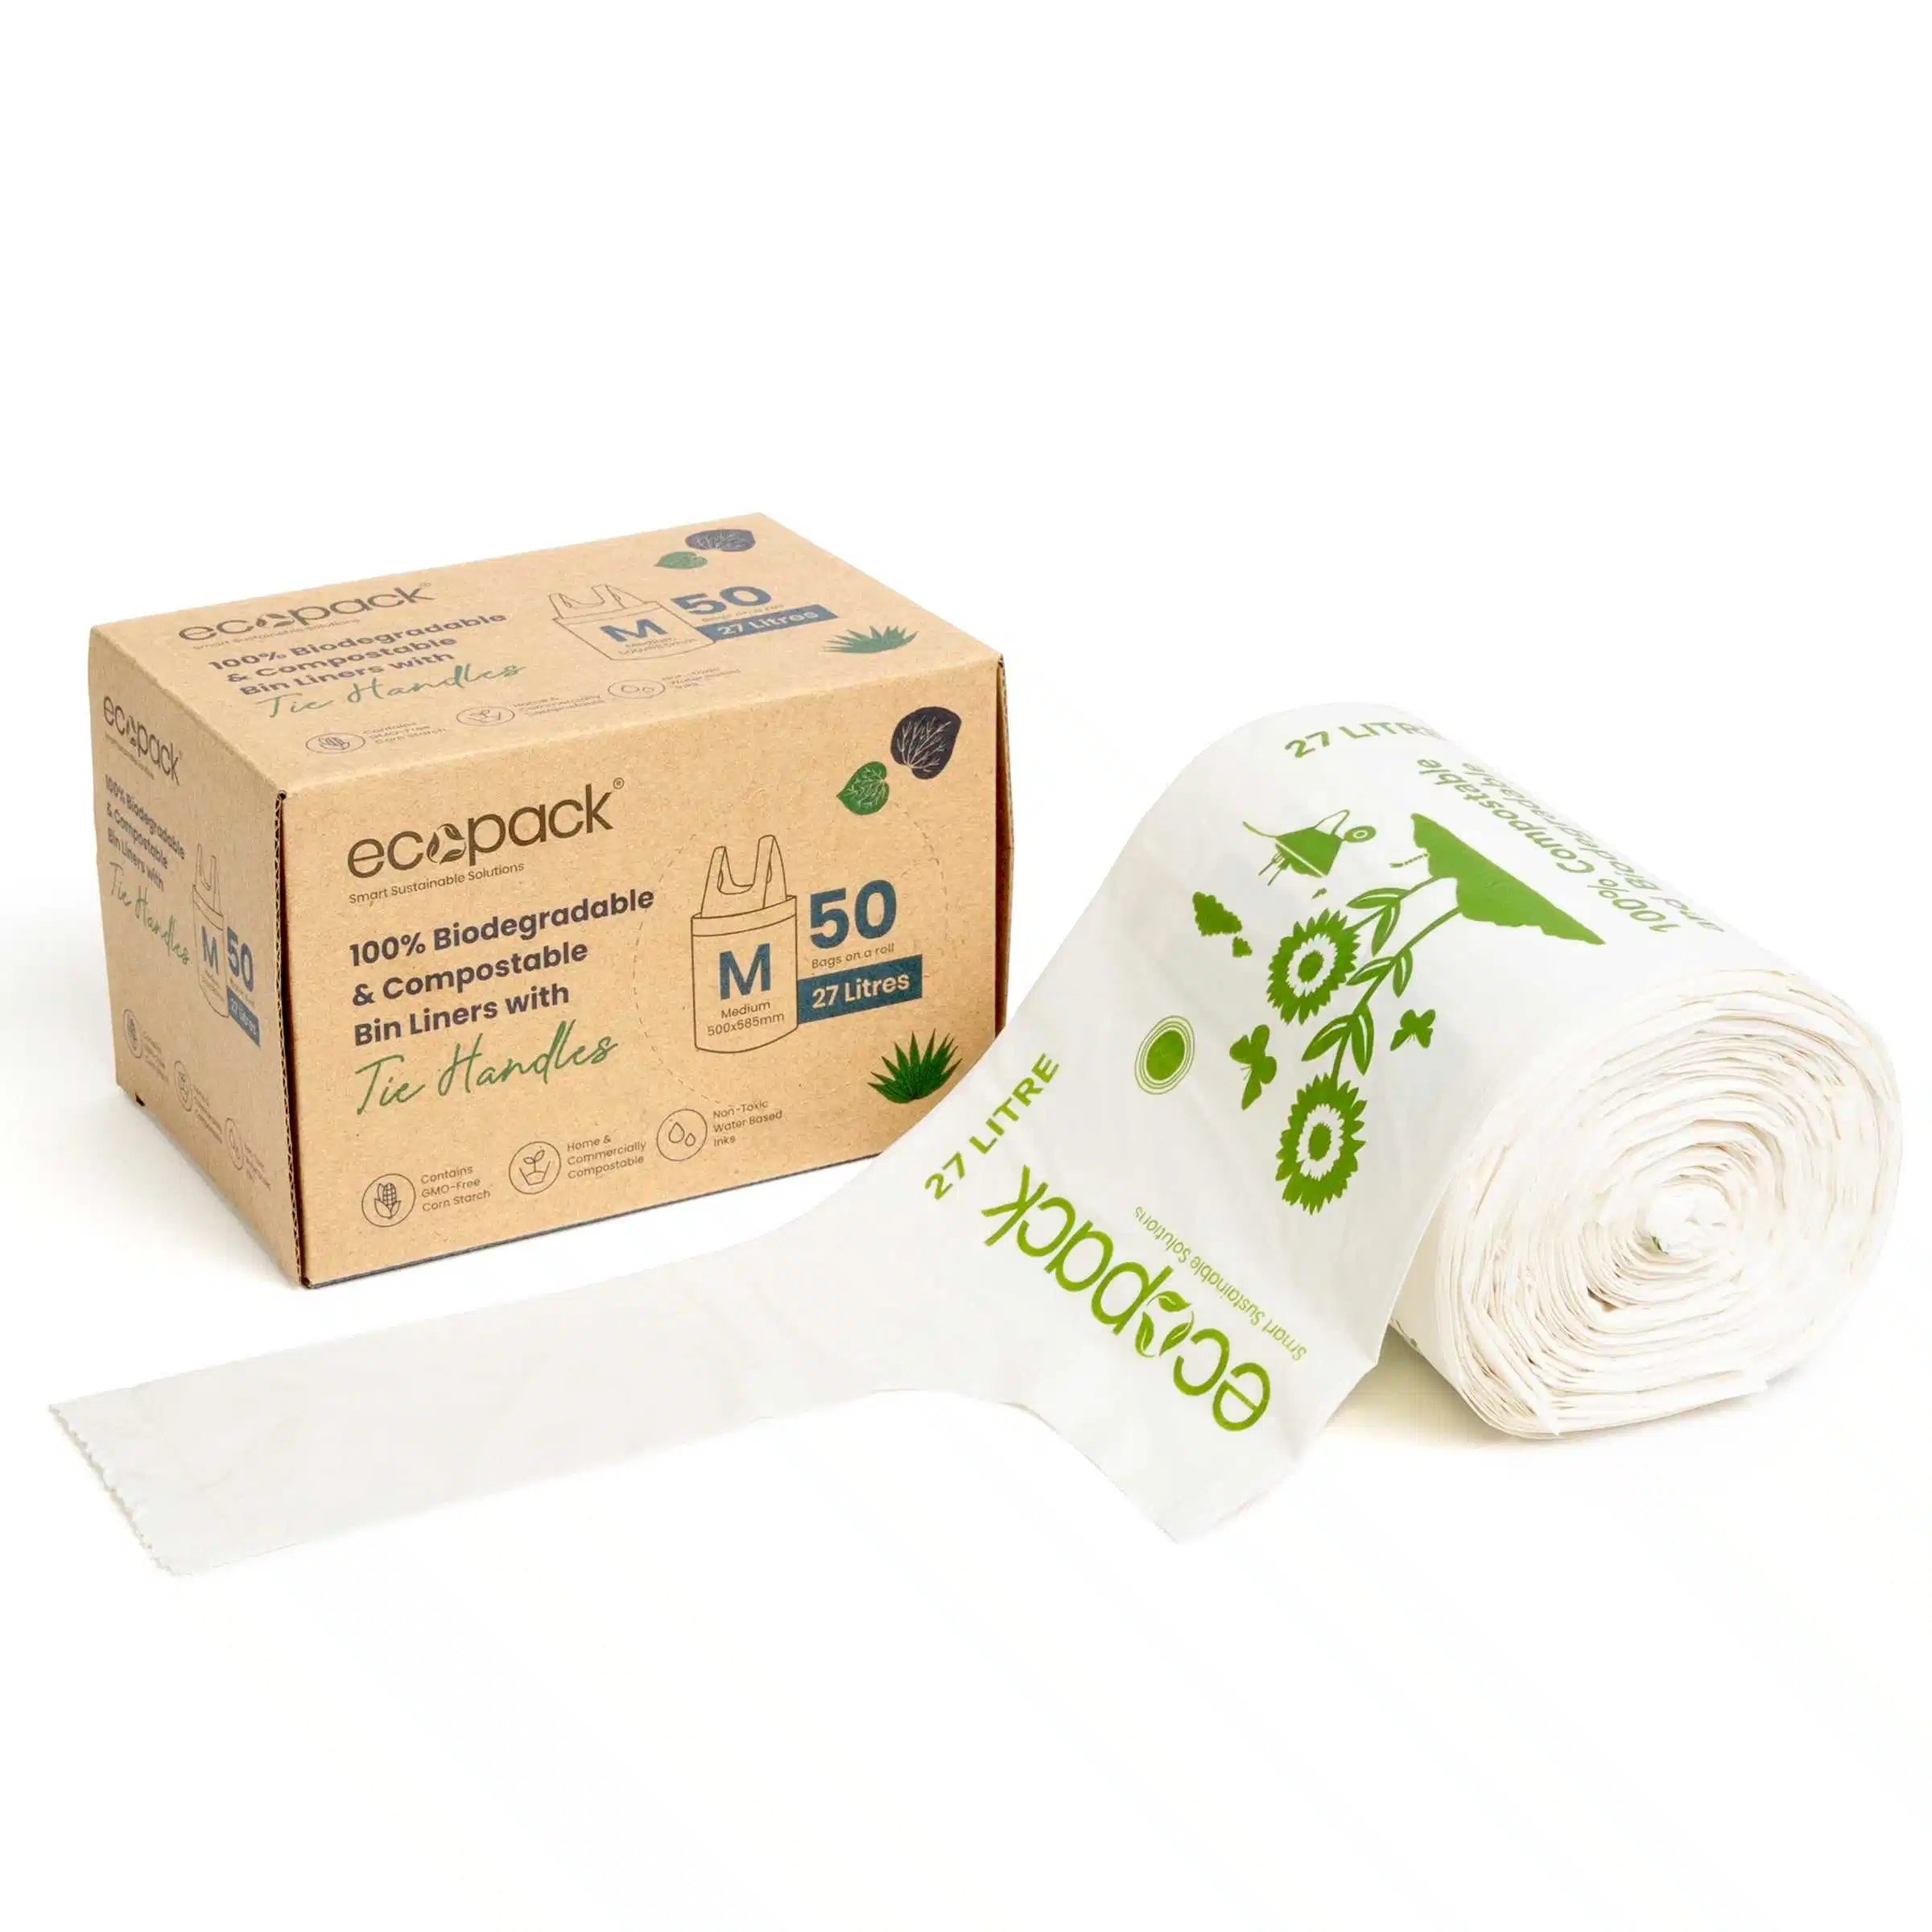 Corn Starch Biodegradable Compostable 13 Gallon Garbage Bags and Trash Bags